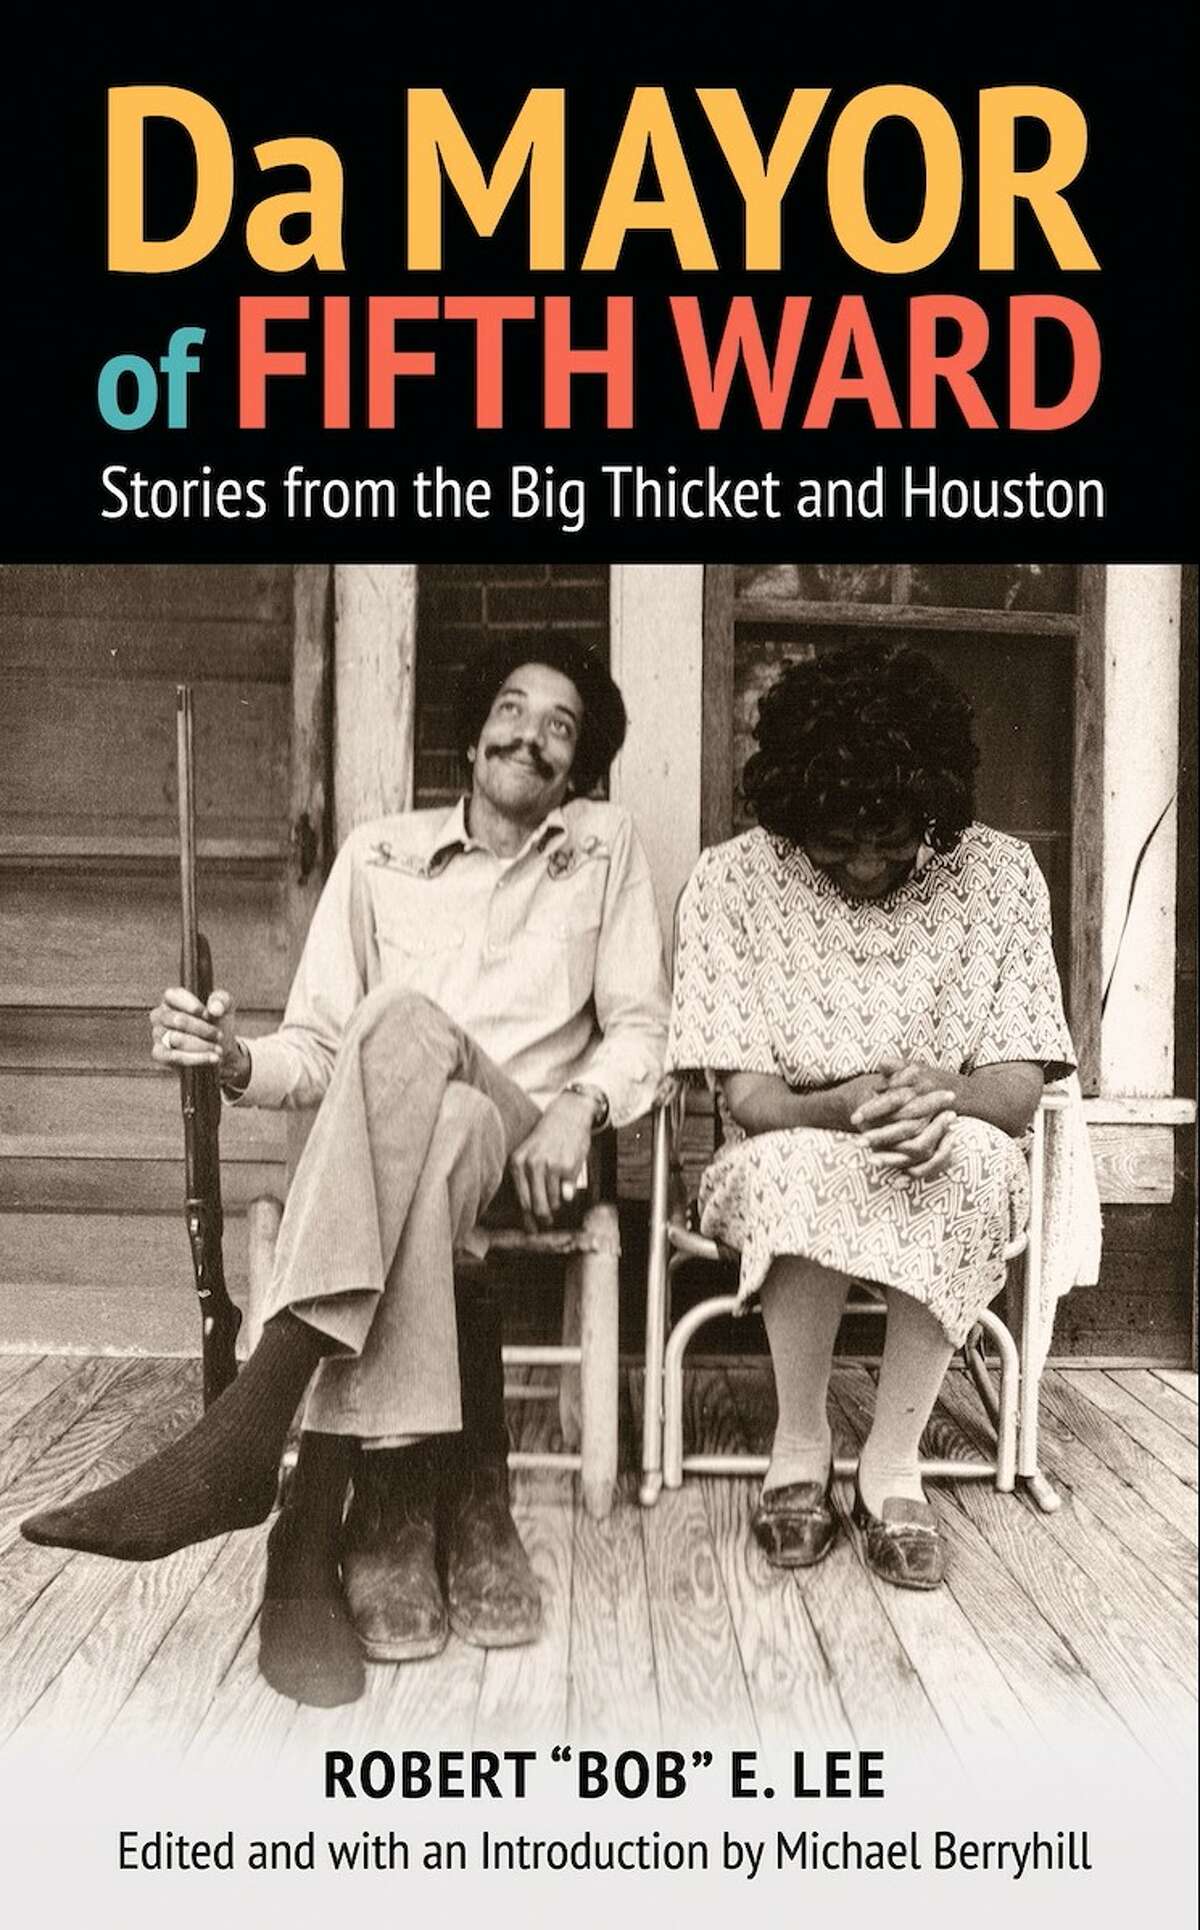 "Da Mayor of Fifth Ward: Stories from the Big Thicket and Houston" by Robert "Bob" E. Lee and edited and introduction by Michael Berryhill